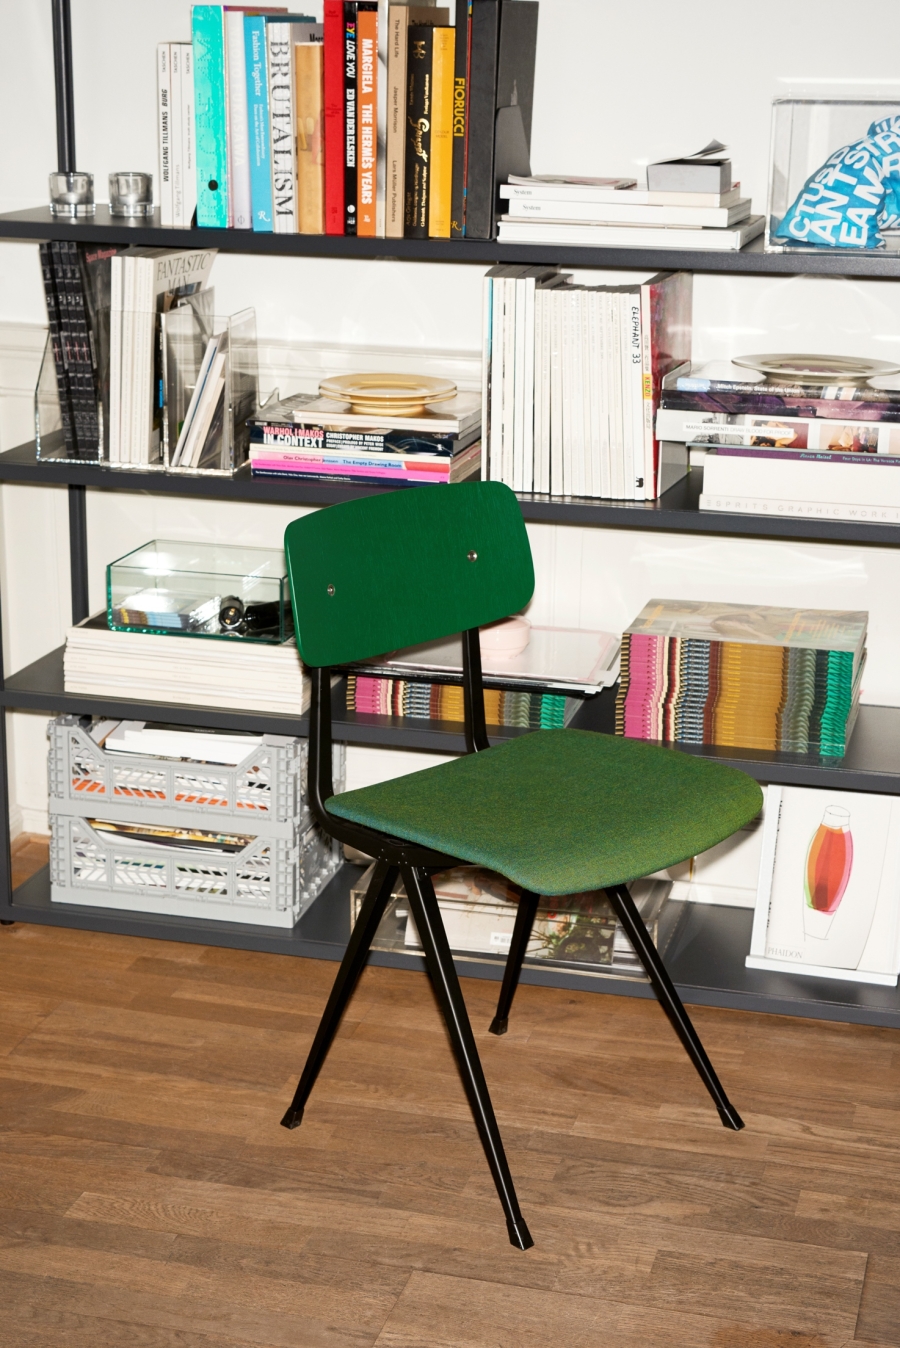 Result Chair designed by Friso Kramer and Wim Rietveld HAY, HAY relaunched Result Chair, Result Chair Ahrend 